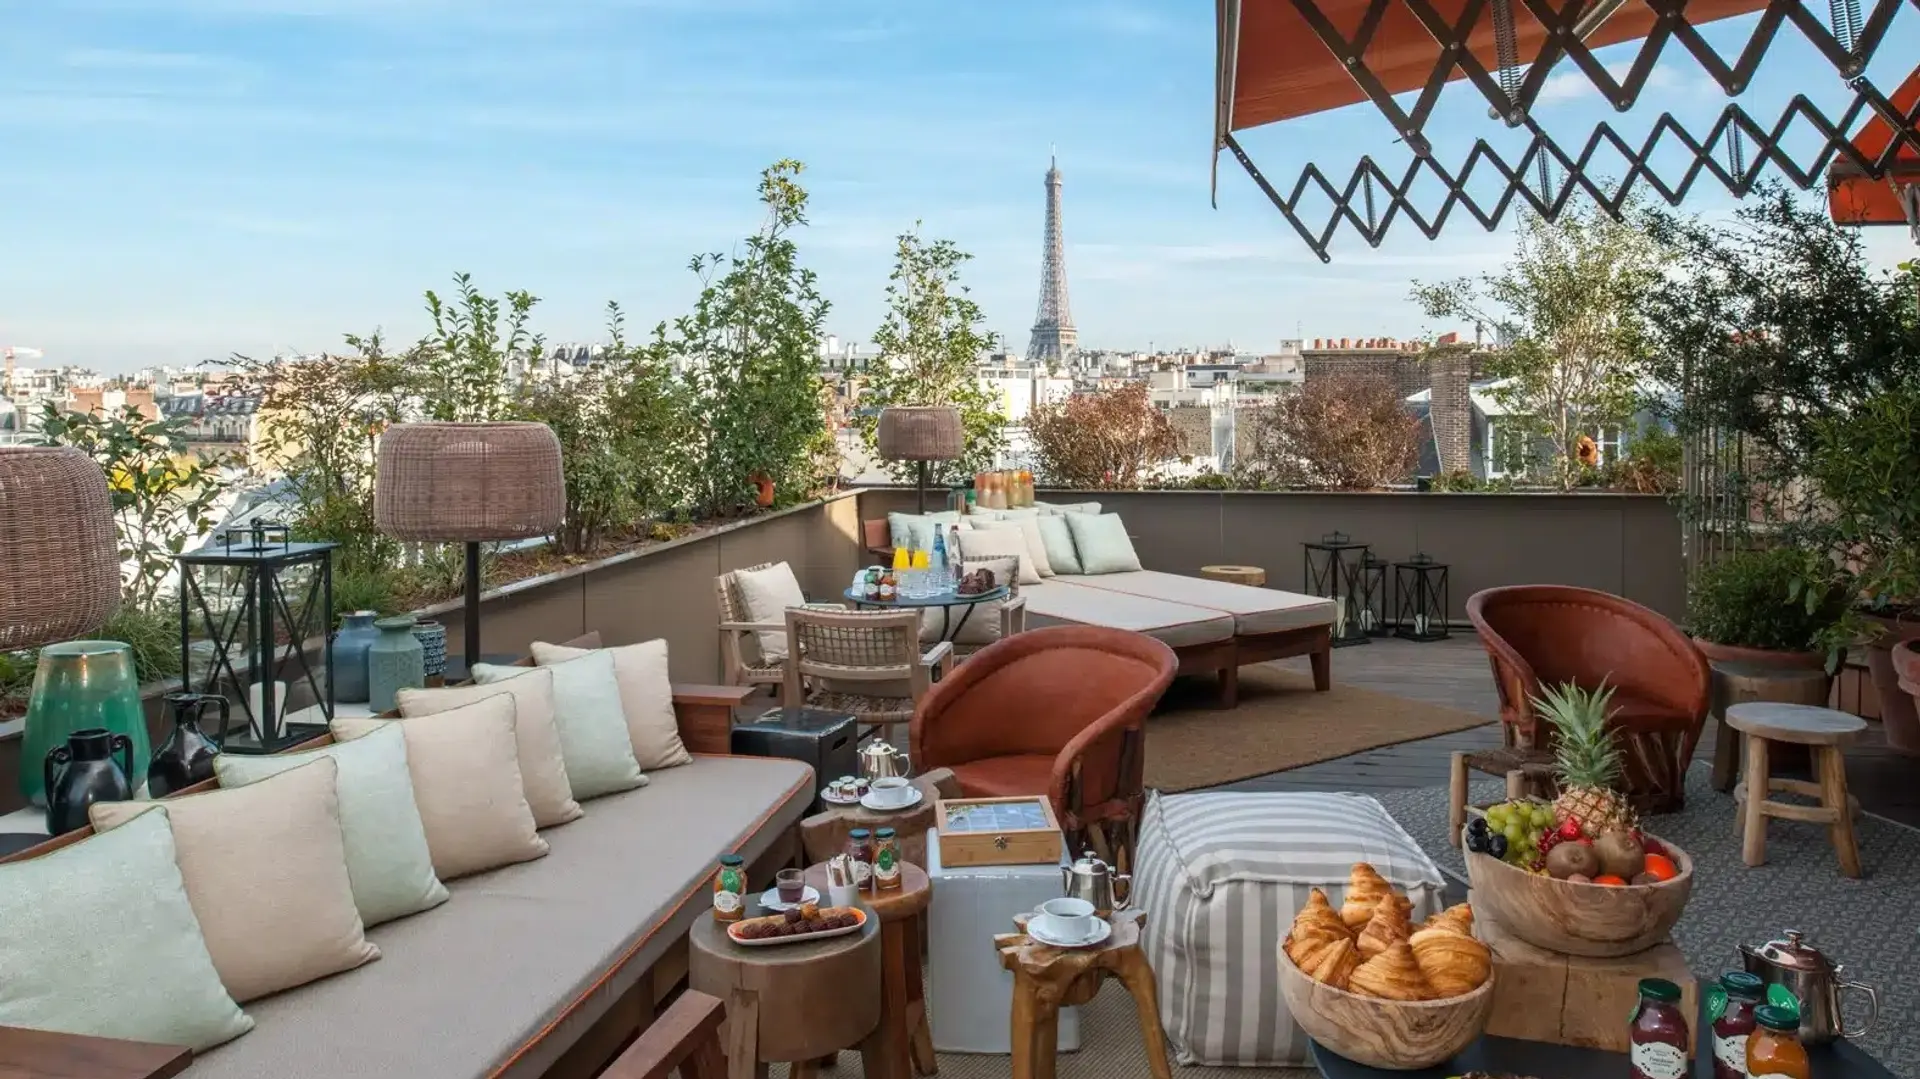 Terrace at hotel brach paris with a sofa, sunbeds, food and drinks